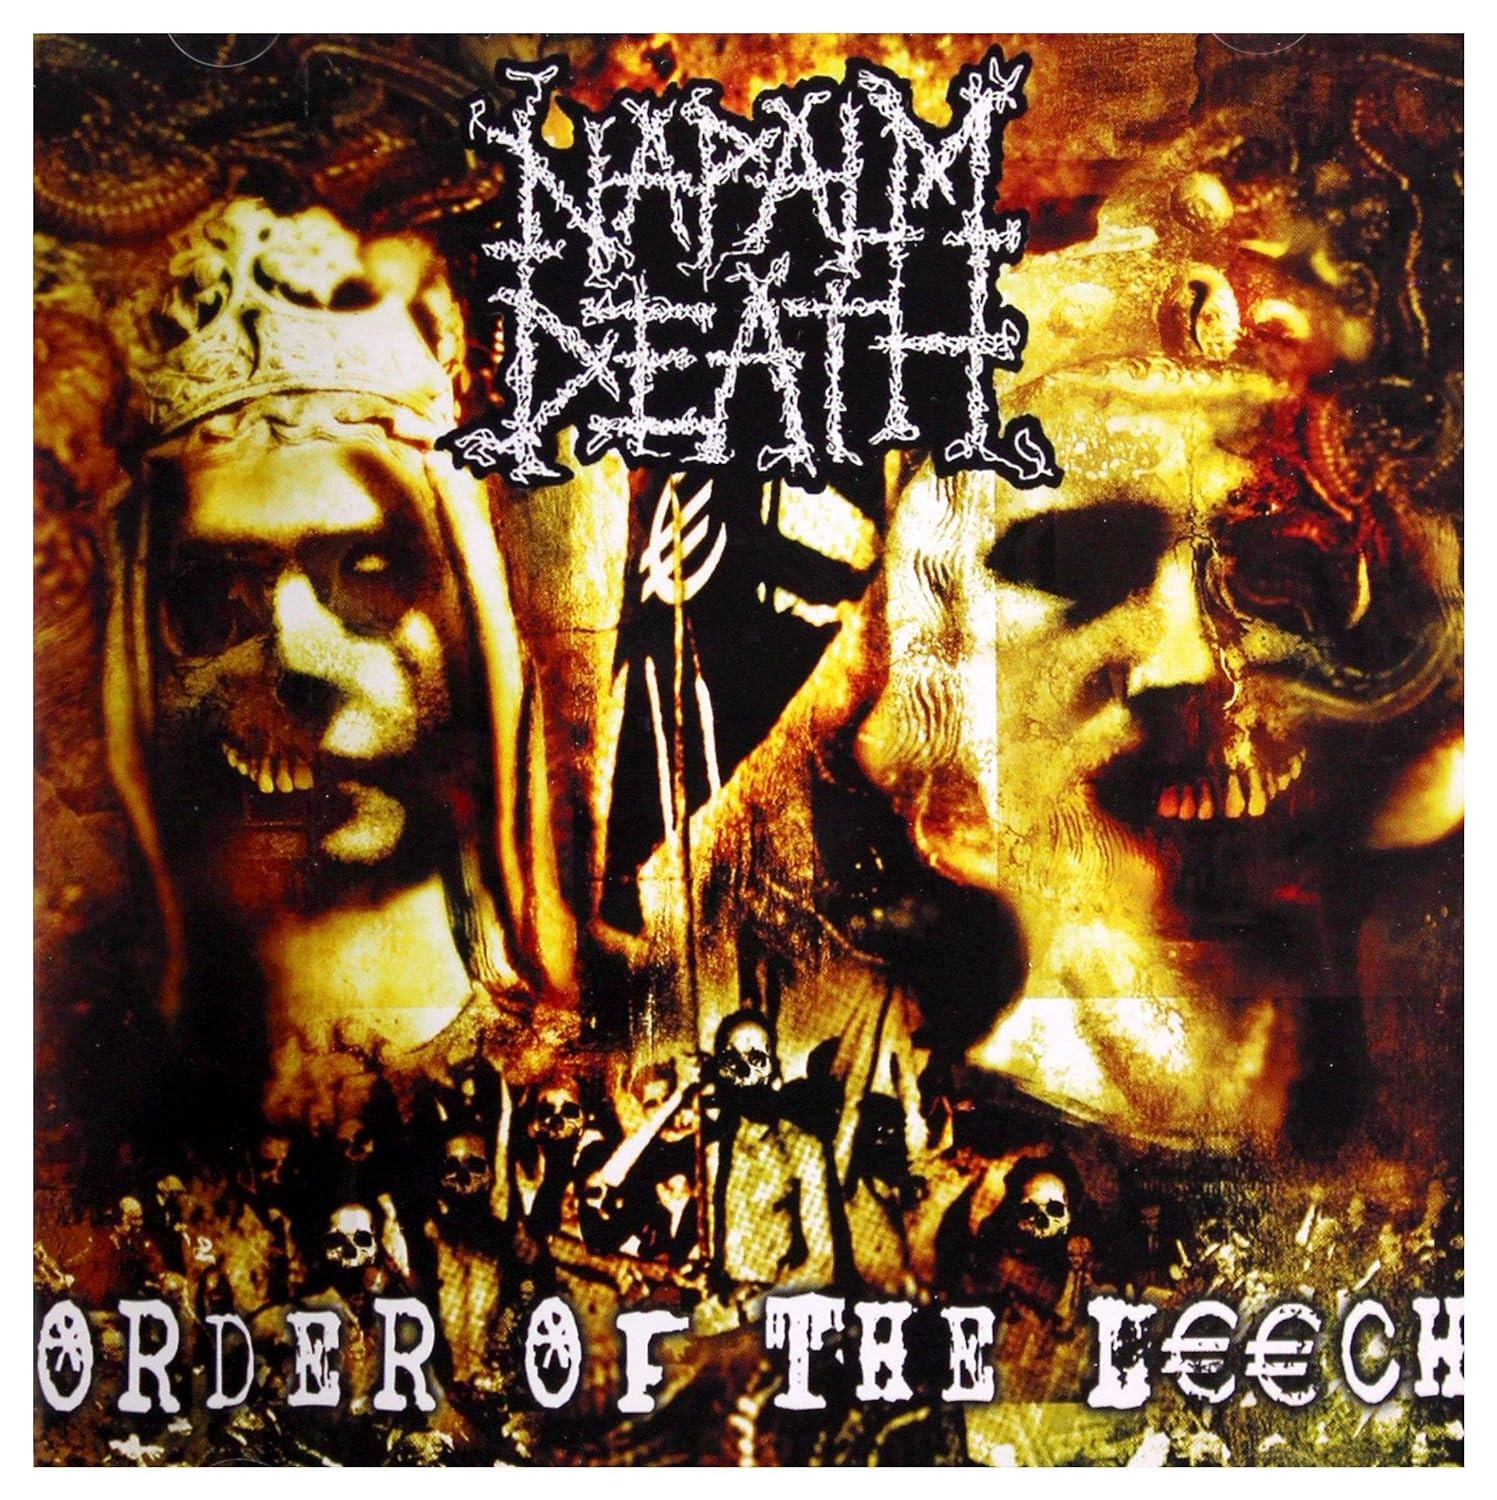 NAPALM DEATH – ORDER OF THE LEECH CD